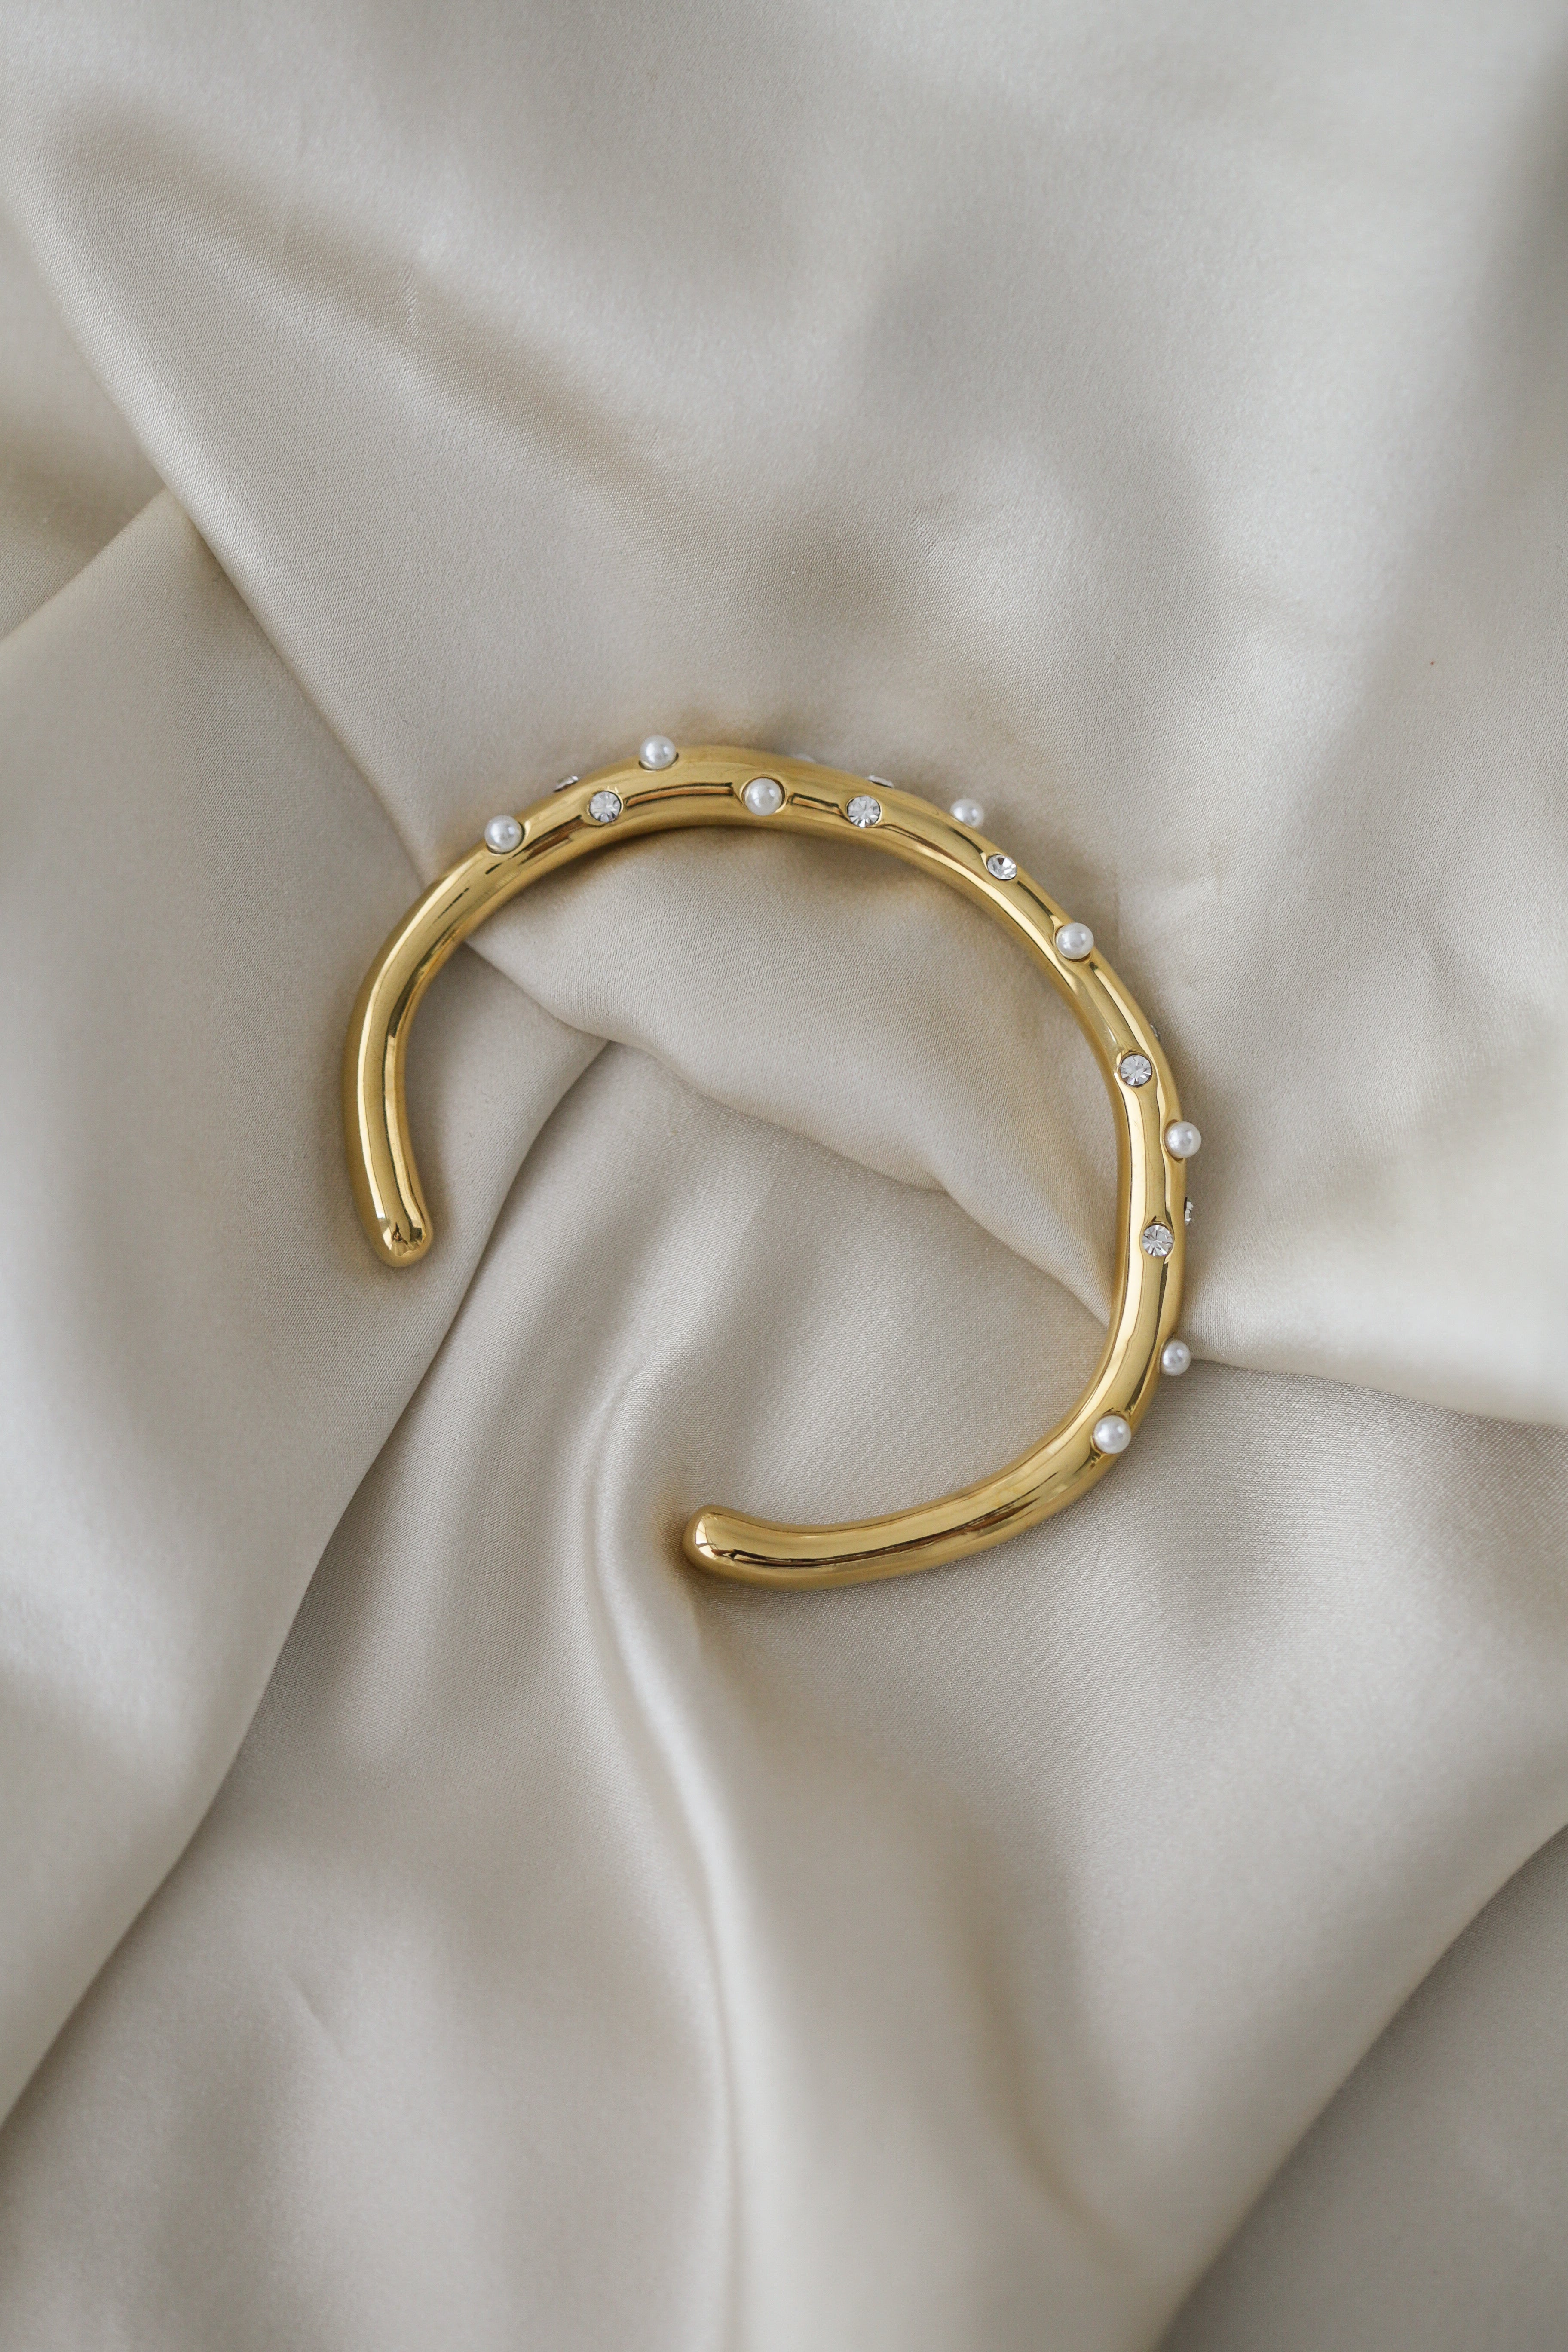 Xanthe Cuff - Boutique Minimaliste has waterproof, durable, elegant and vintage inspired jewelry